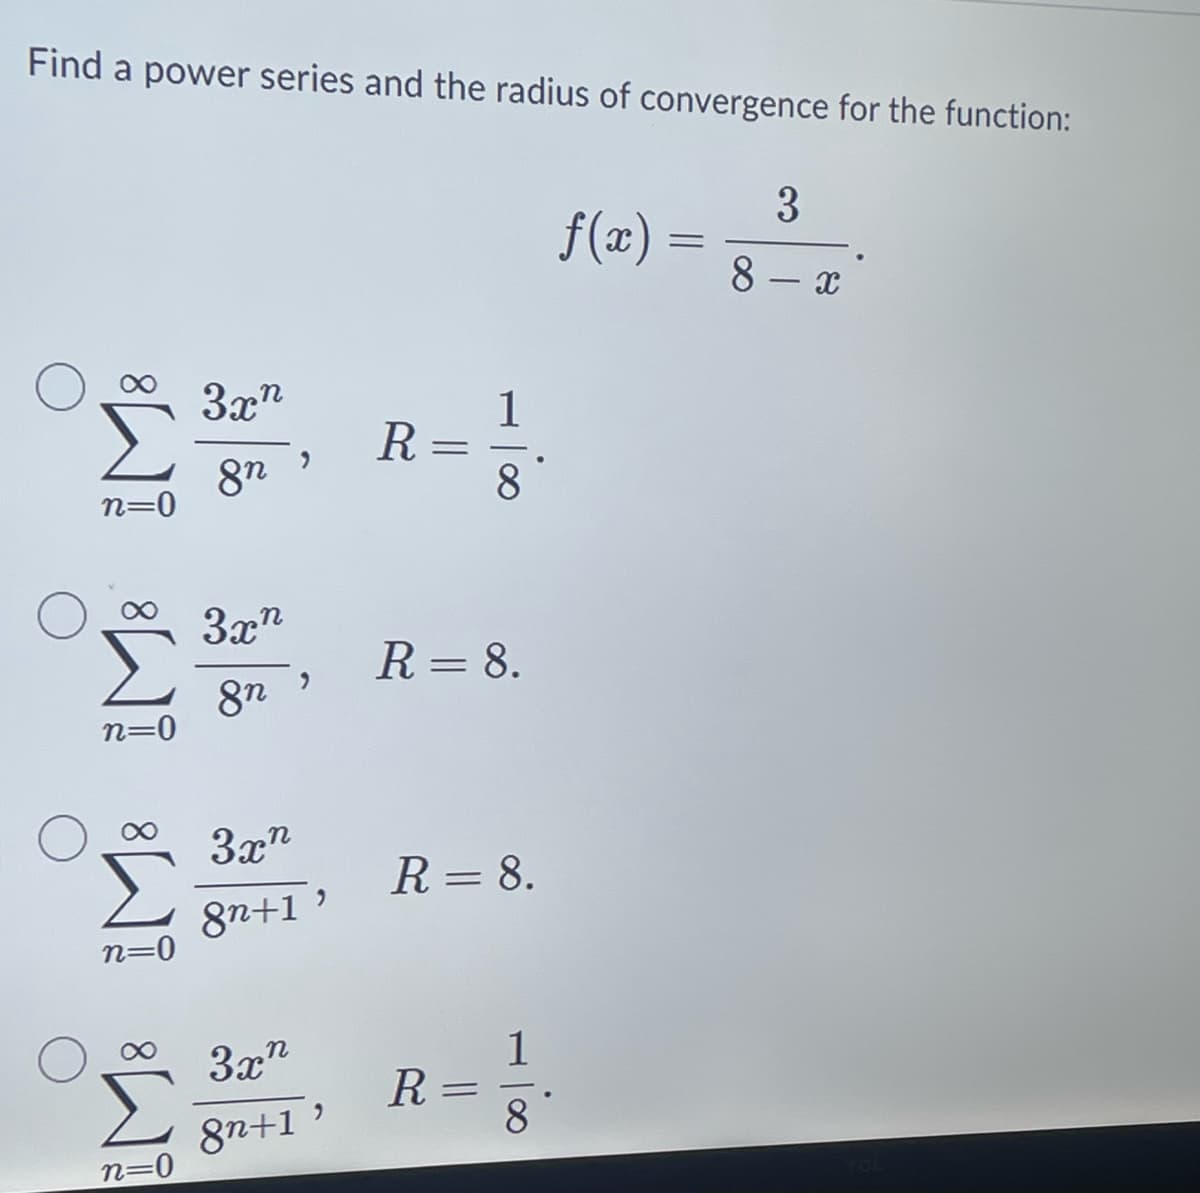 Find a power series and the radius of convergence for the function:
n=0
n=0
n=0
n=0
3xn
8n
3xn
8n
3x
8n+1'
3xn
8n+1
"
R =
- 100
R = 8.
R = 8.
R=
1
8
f(x)
=
3
8 - x